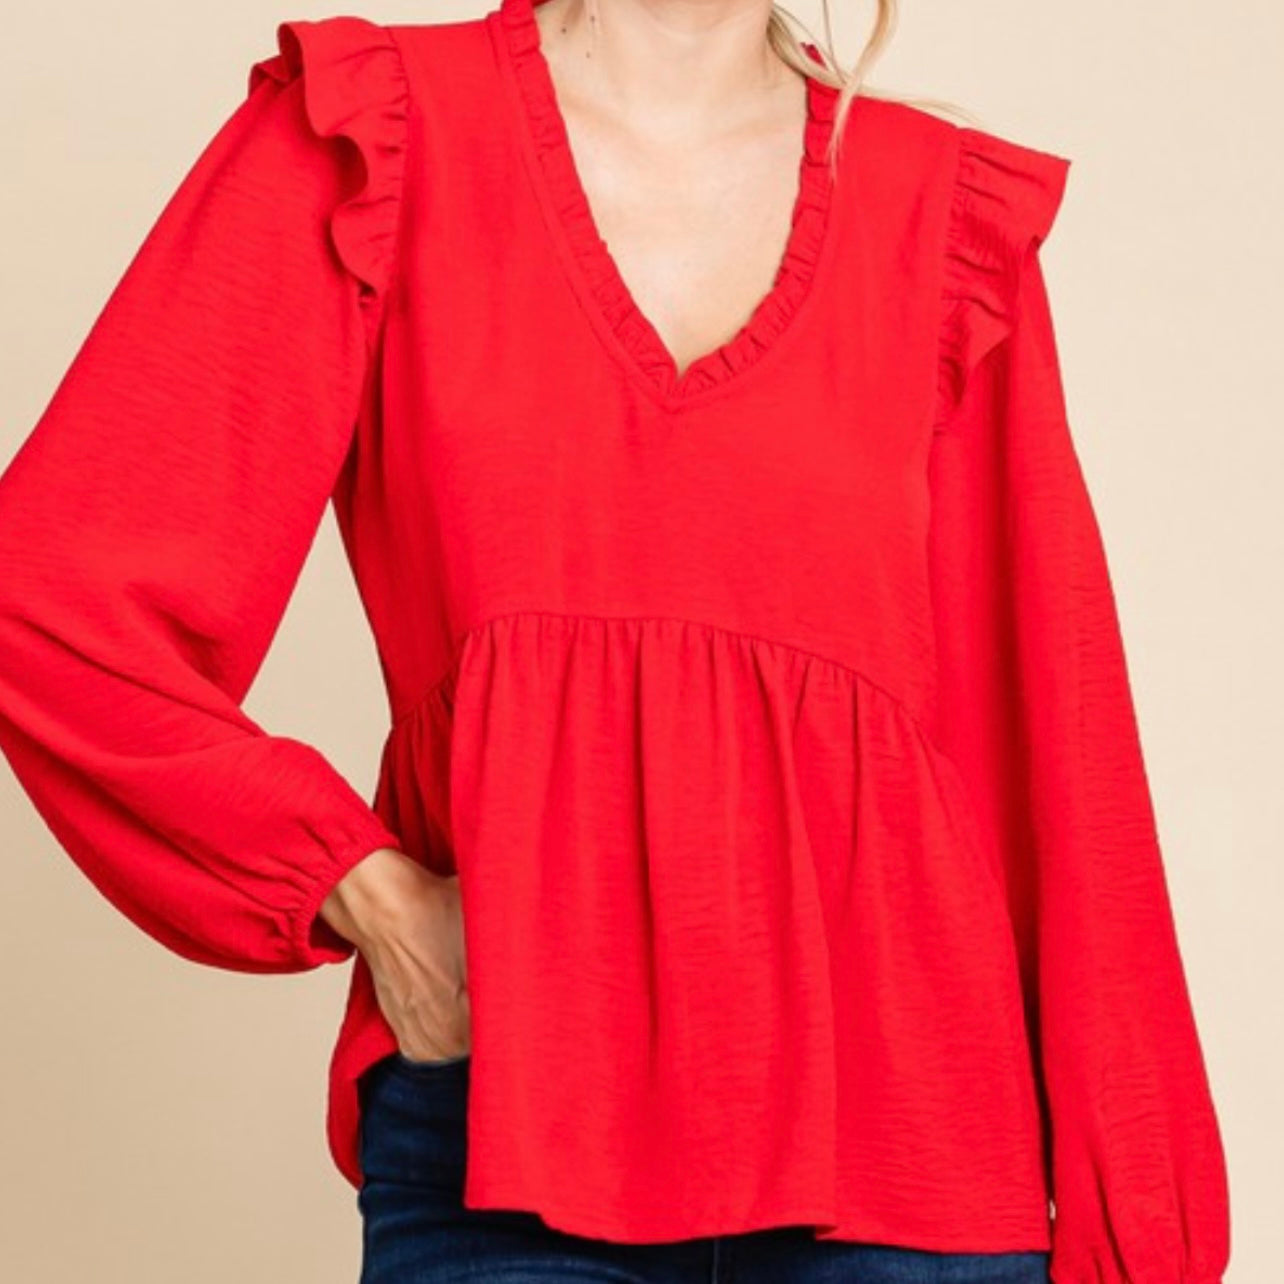 Red Bubble Sleeve Baby Doll Top